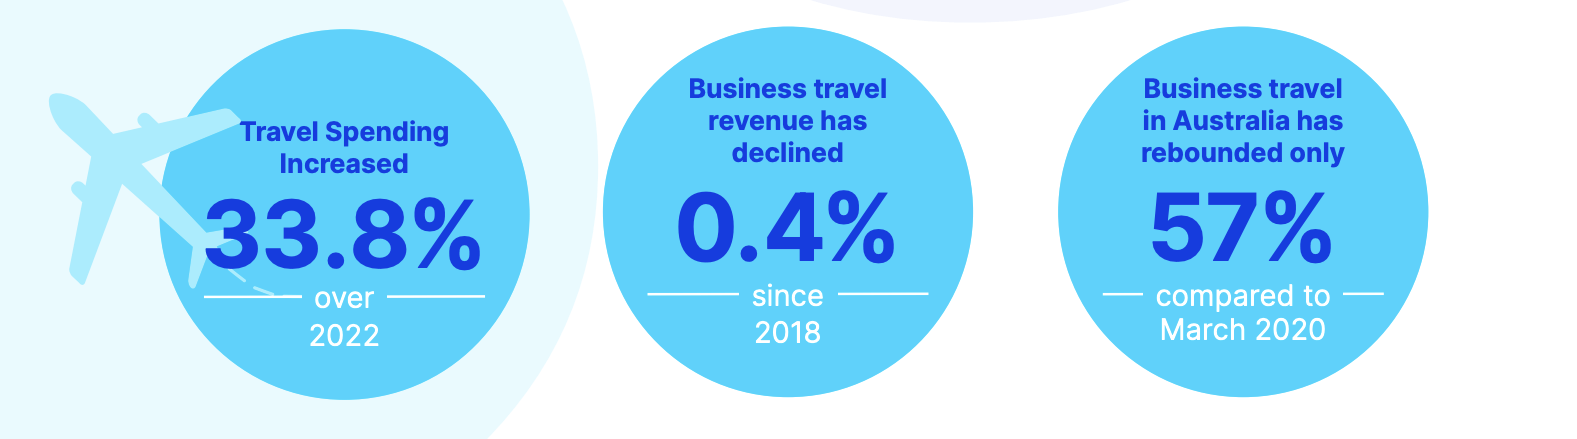 Business Travel Statistic Infographic Image